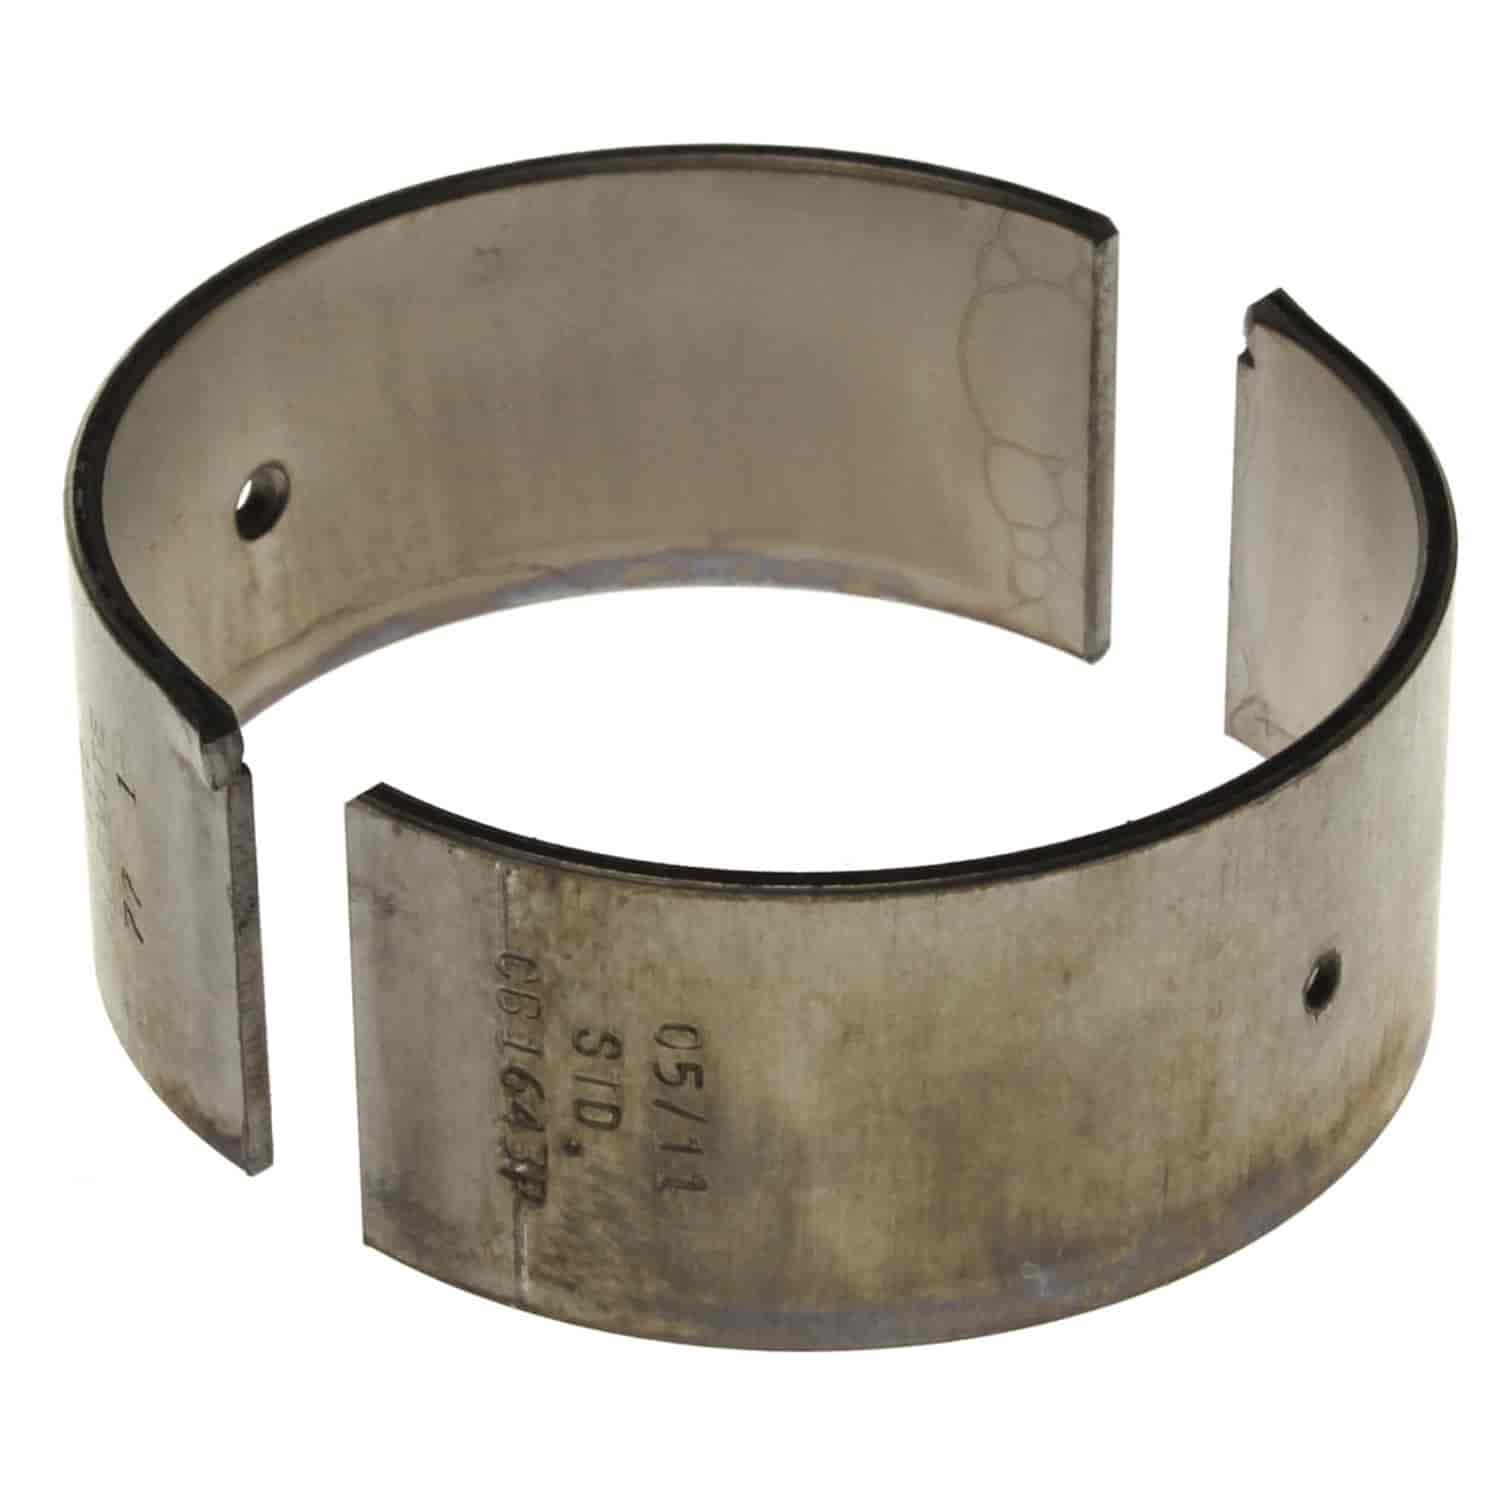 Connecting Rod Bearing Chrysler/Mistubishi  1971-1994 L4 1.6/1.8/2.0/2.4L with Standard Size